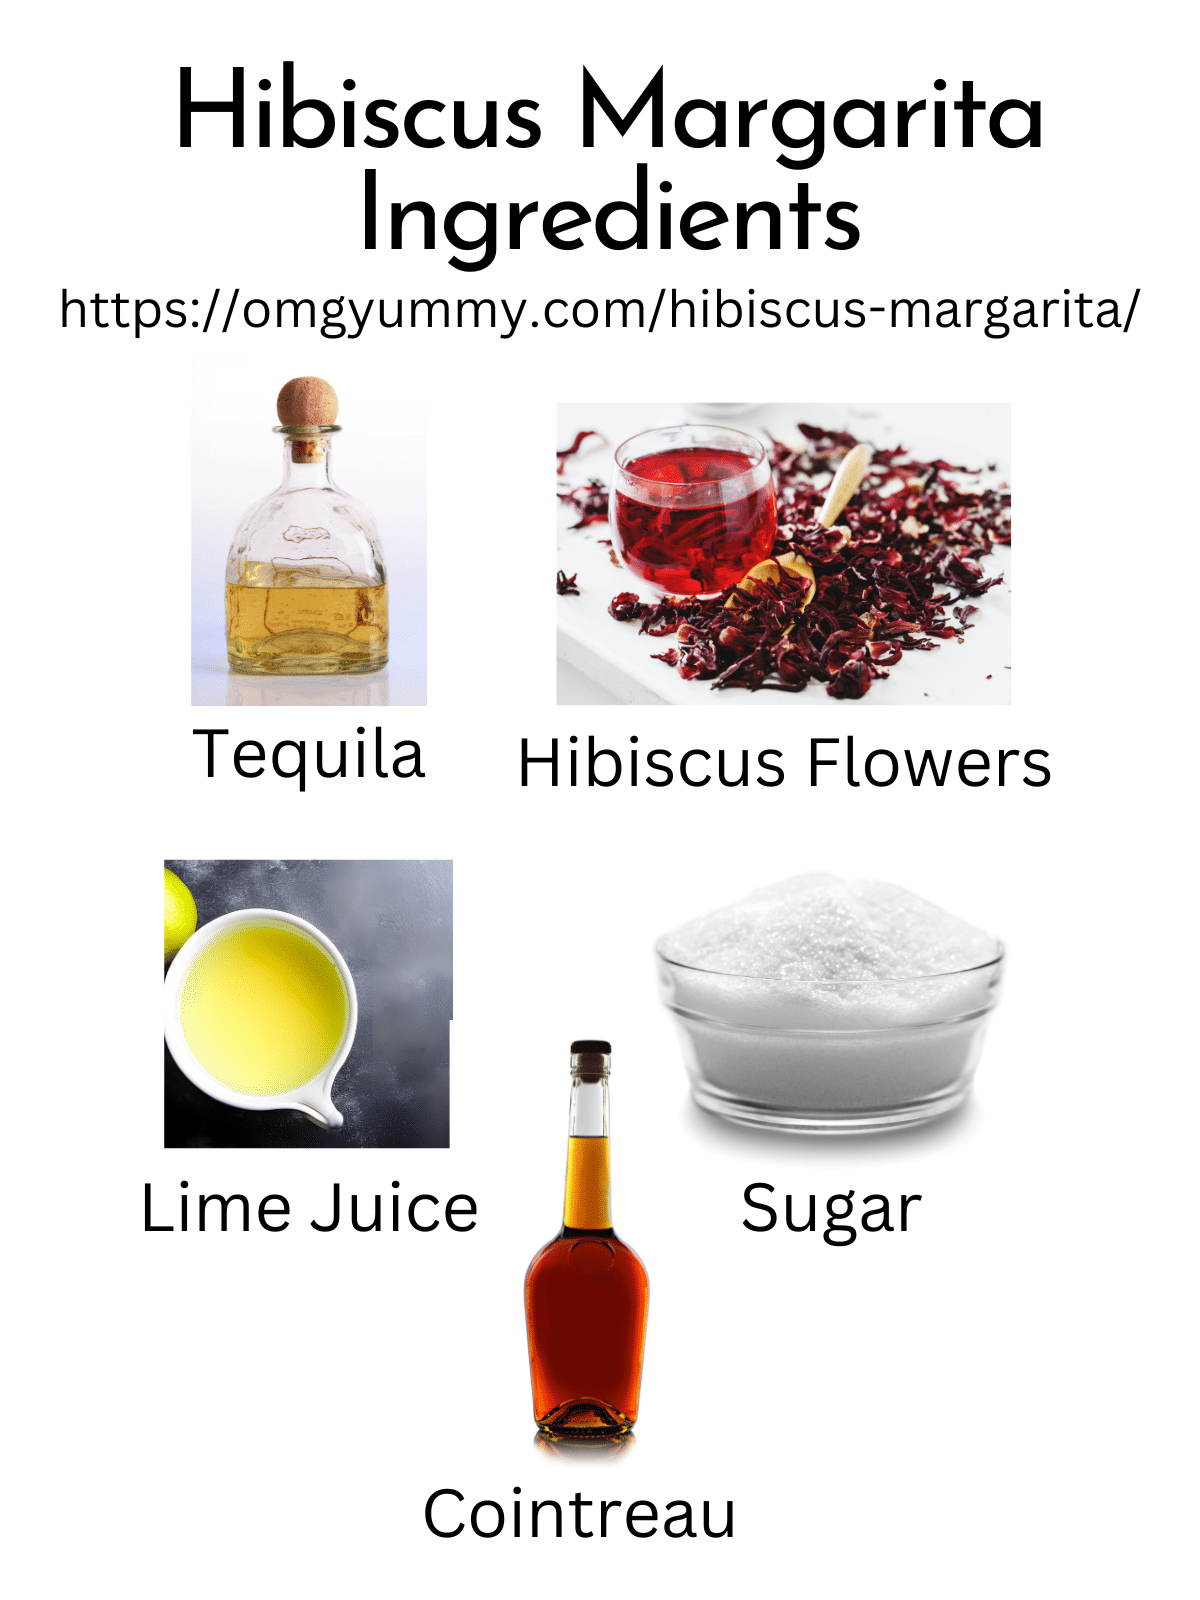 Ingredient shot for hibiscus margarita showing the tequila, hibiscus flowers, lime juice, sugar and cointreau on a white background.